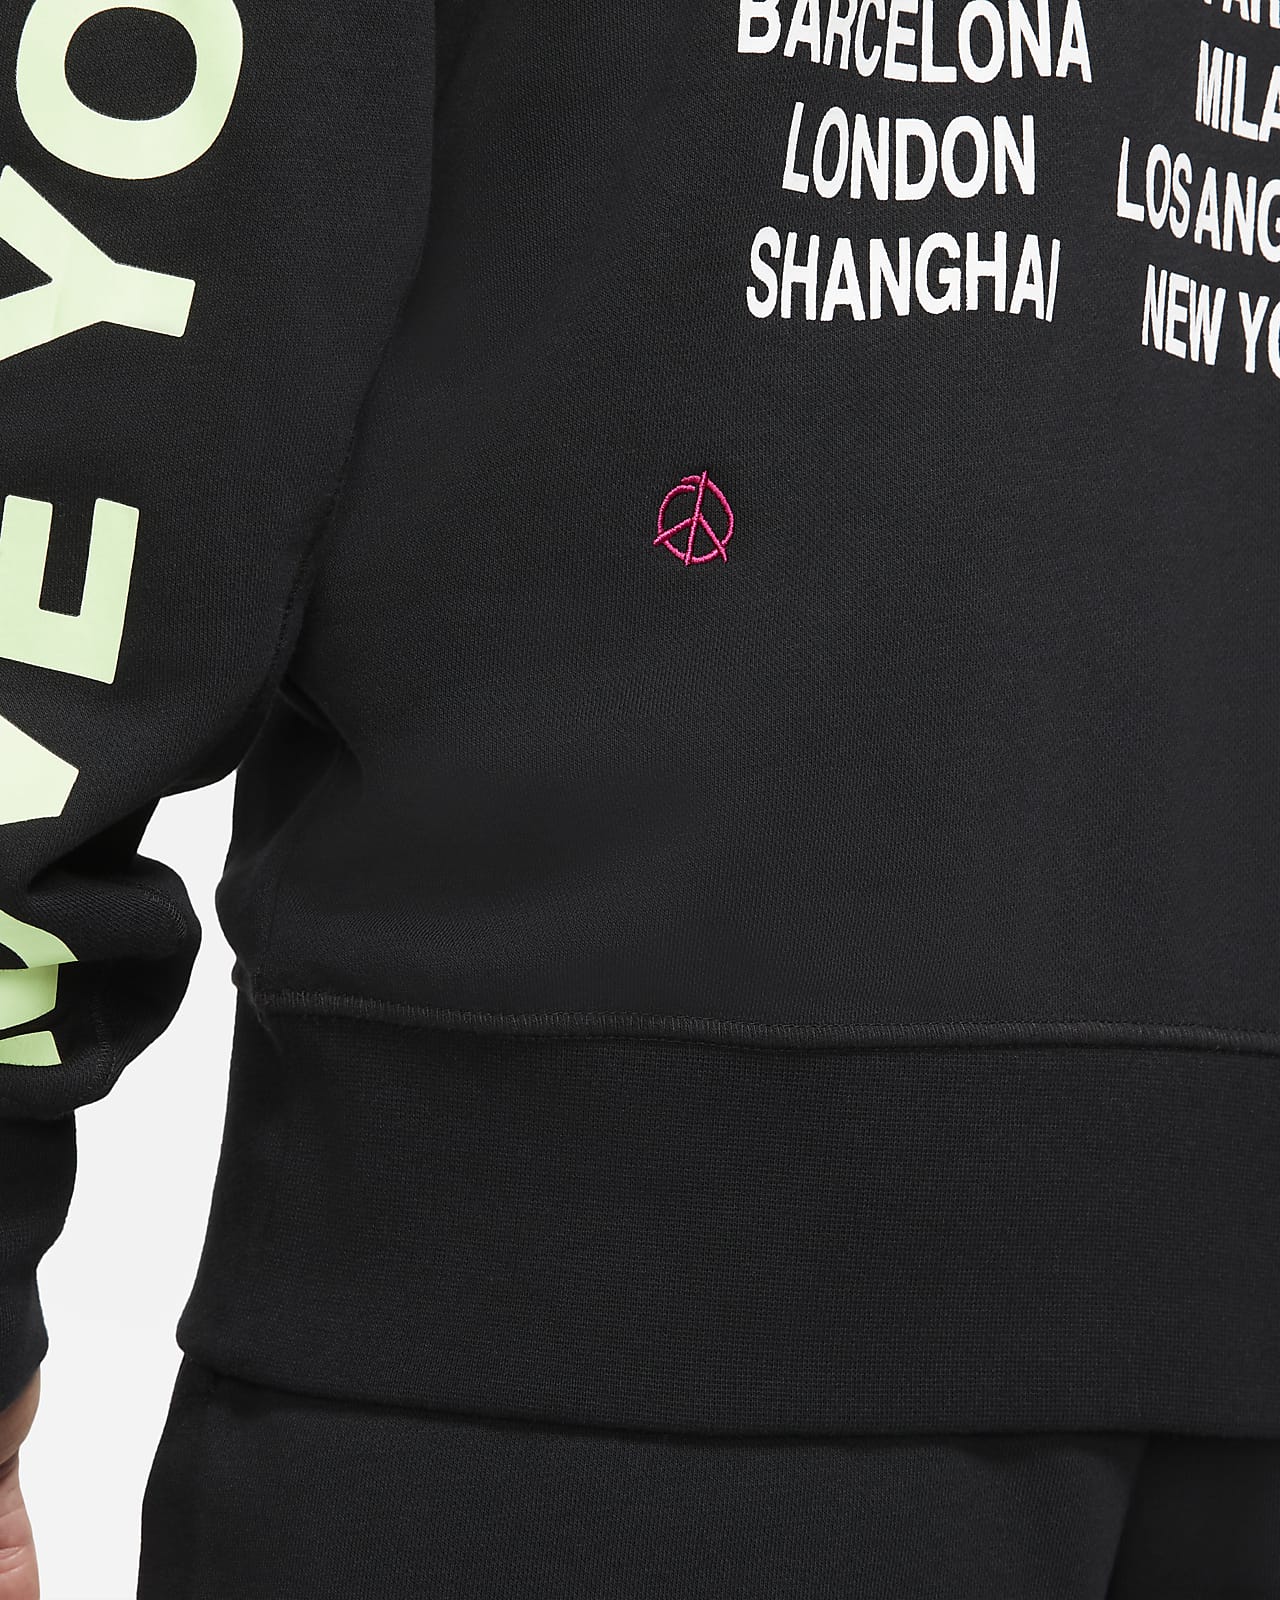 french terry nike hoodie